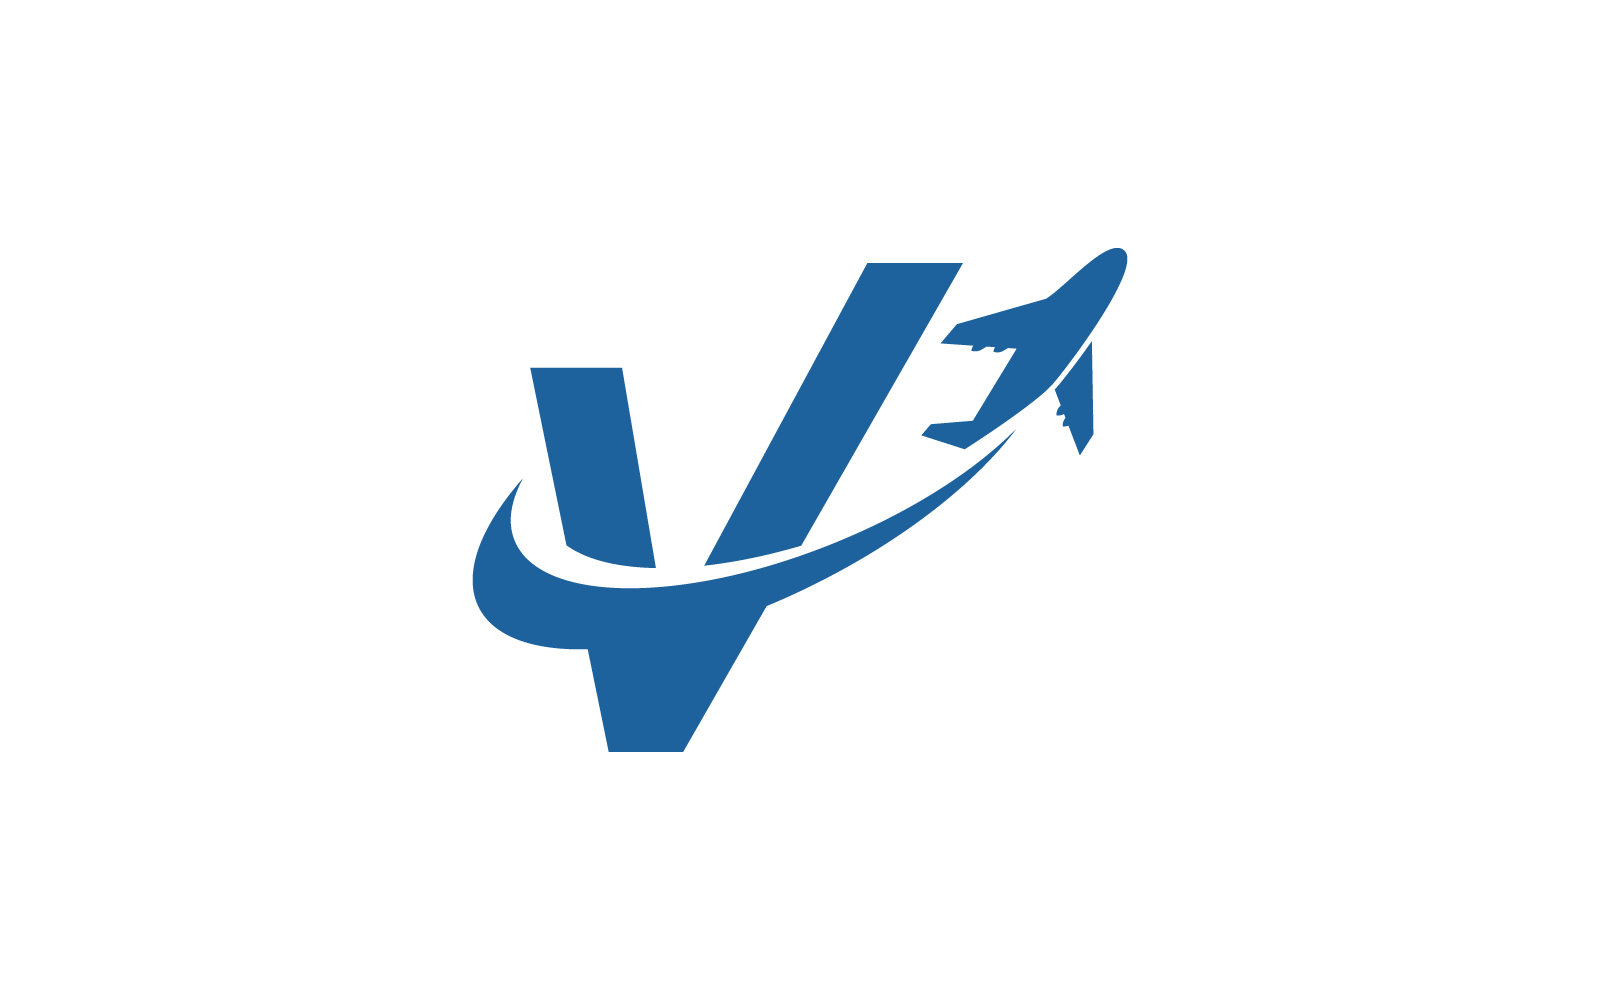 Air Plane with V initial logo vector template